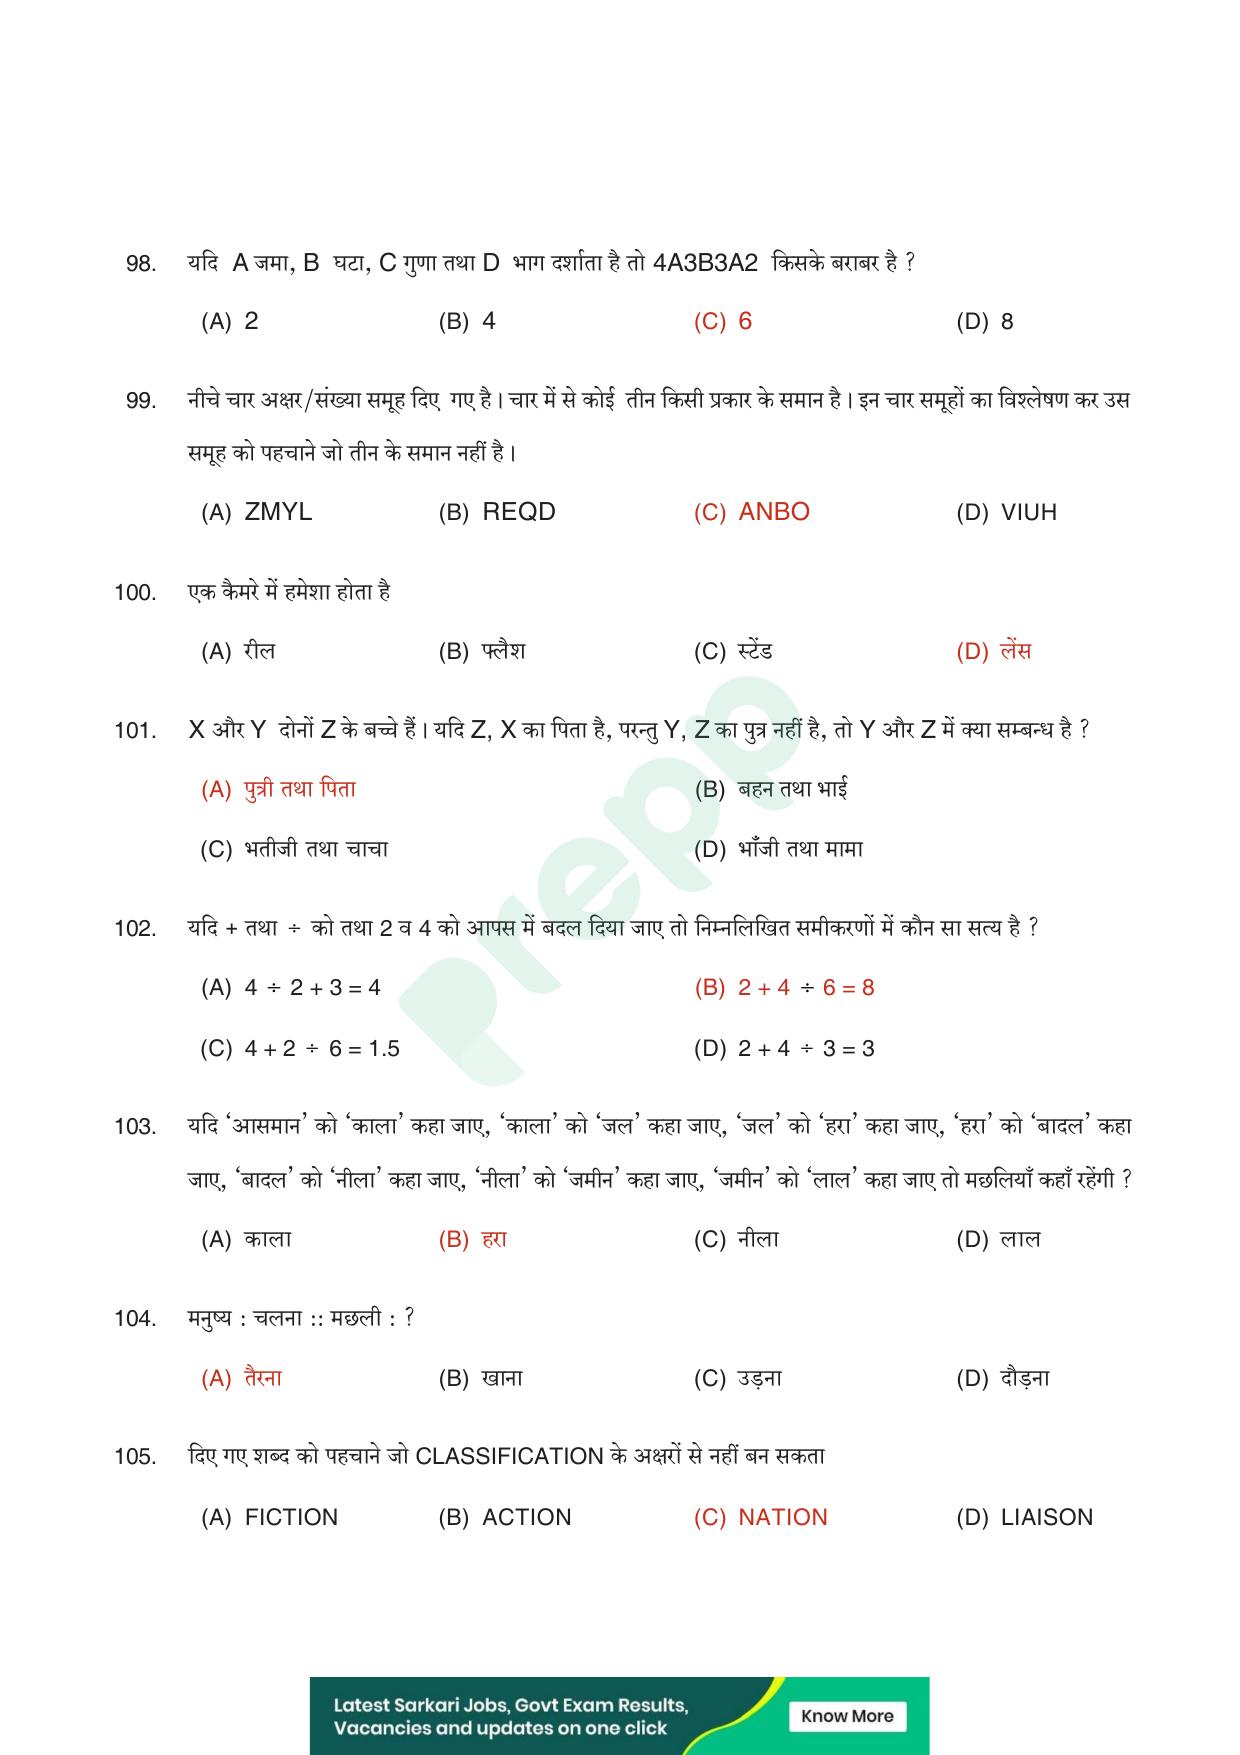 UPPRPB Police Constable Question Papers - Page 19